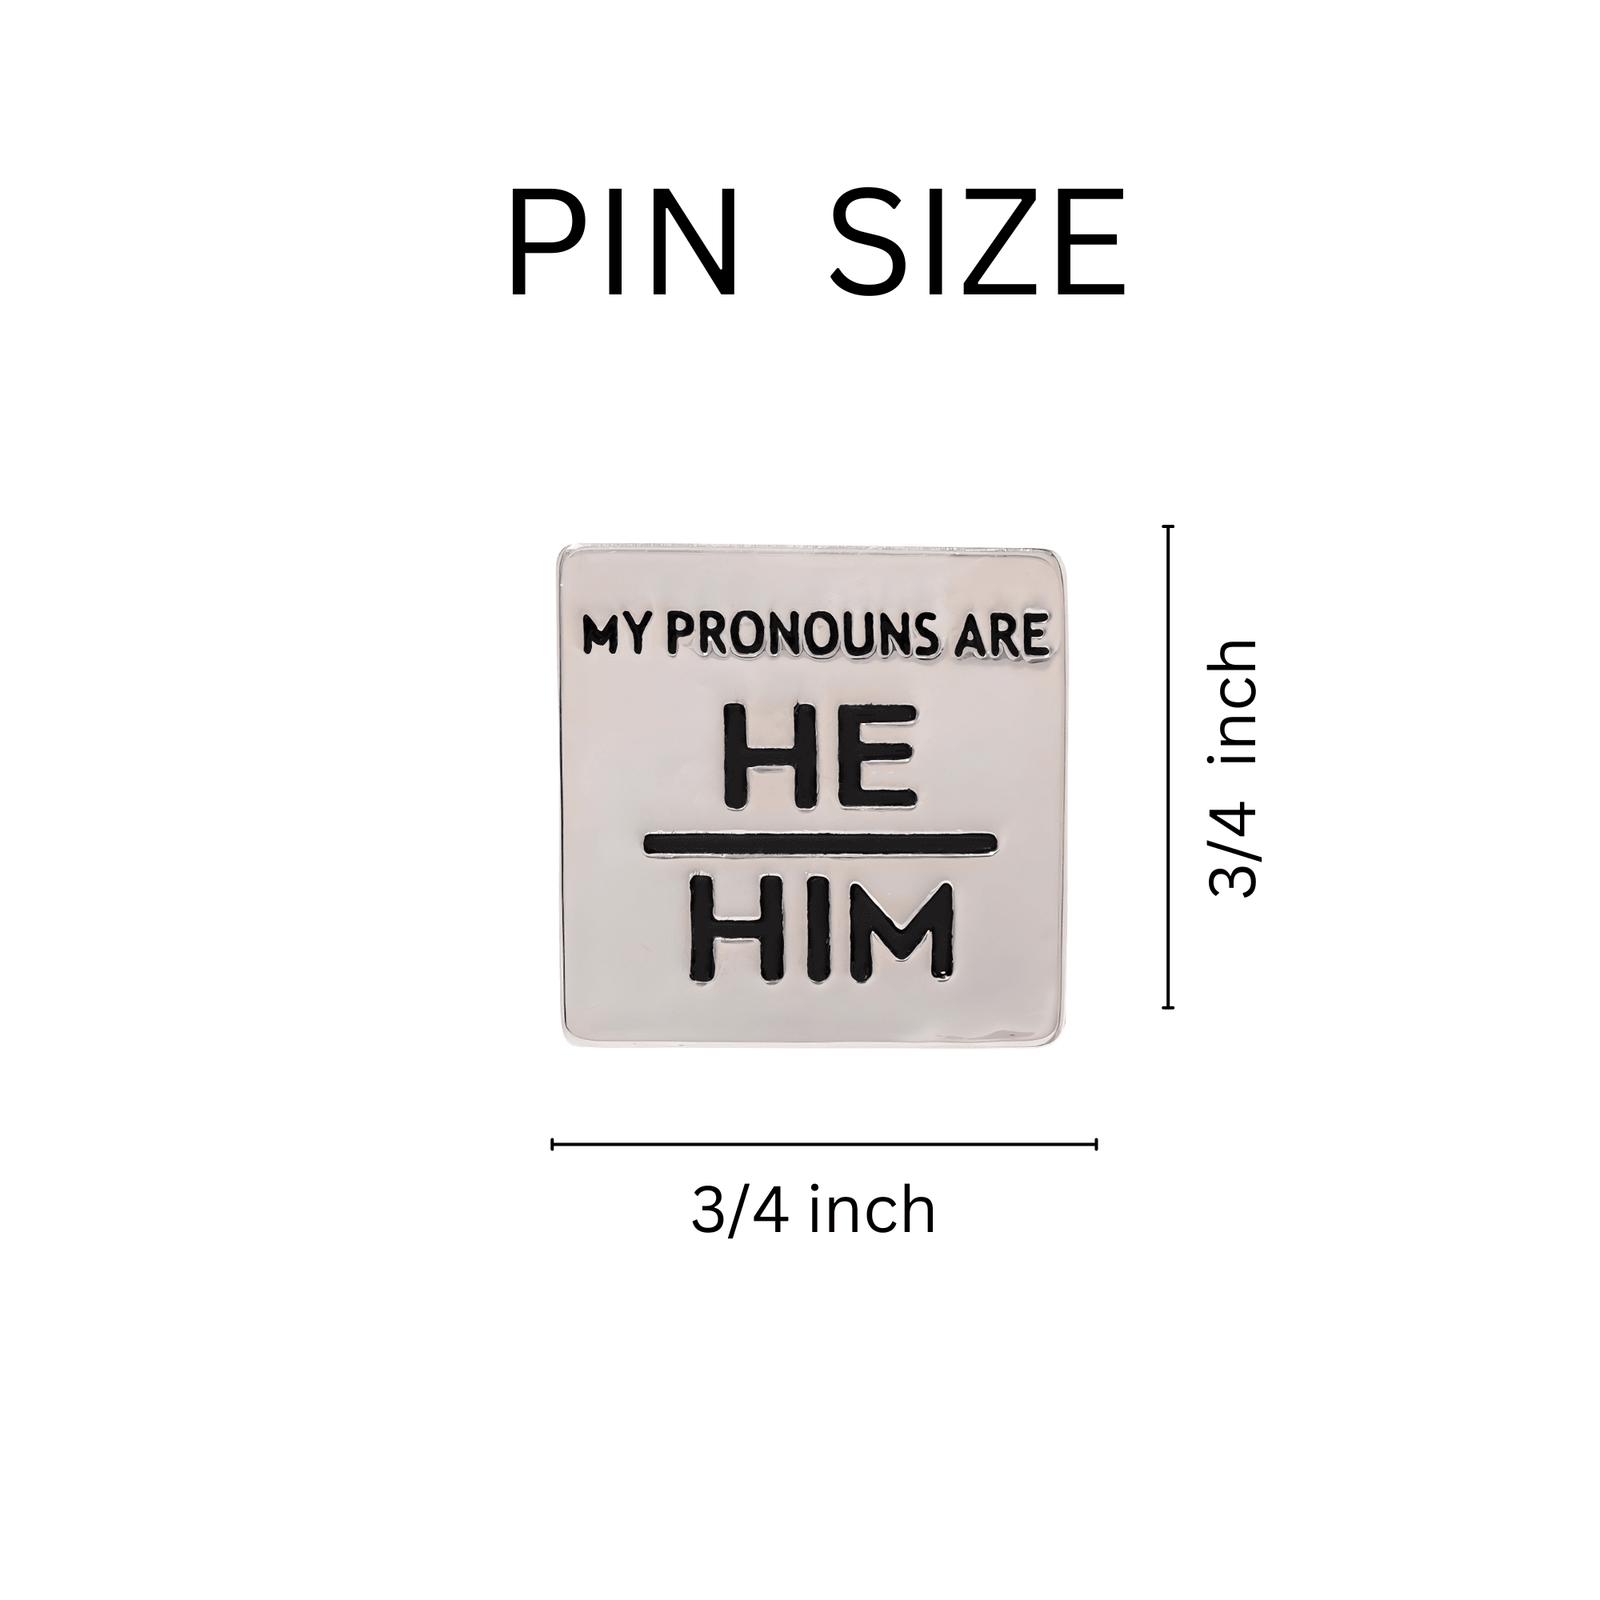 Budget-Friendly Bulk He/Him Pronoun Pins - Empowerment and Pride in Every Pack